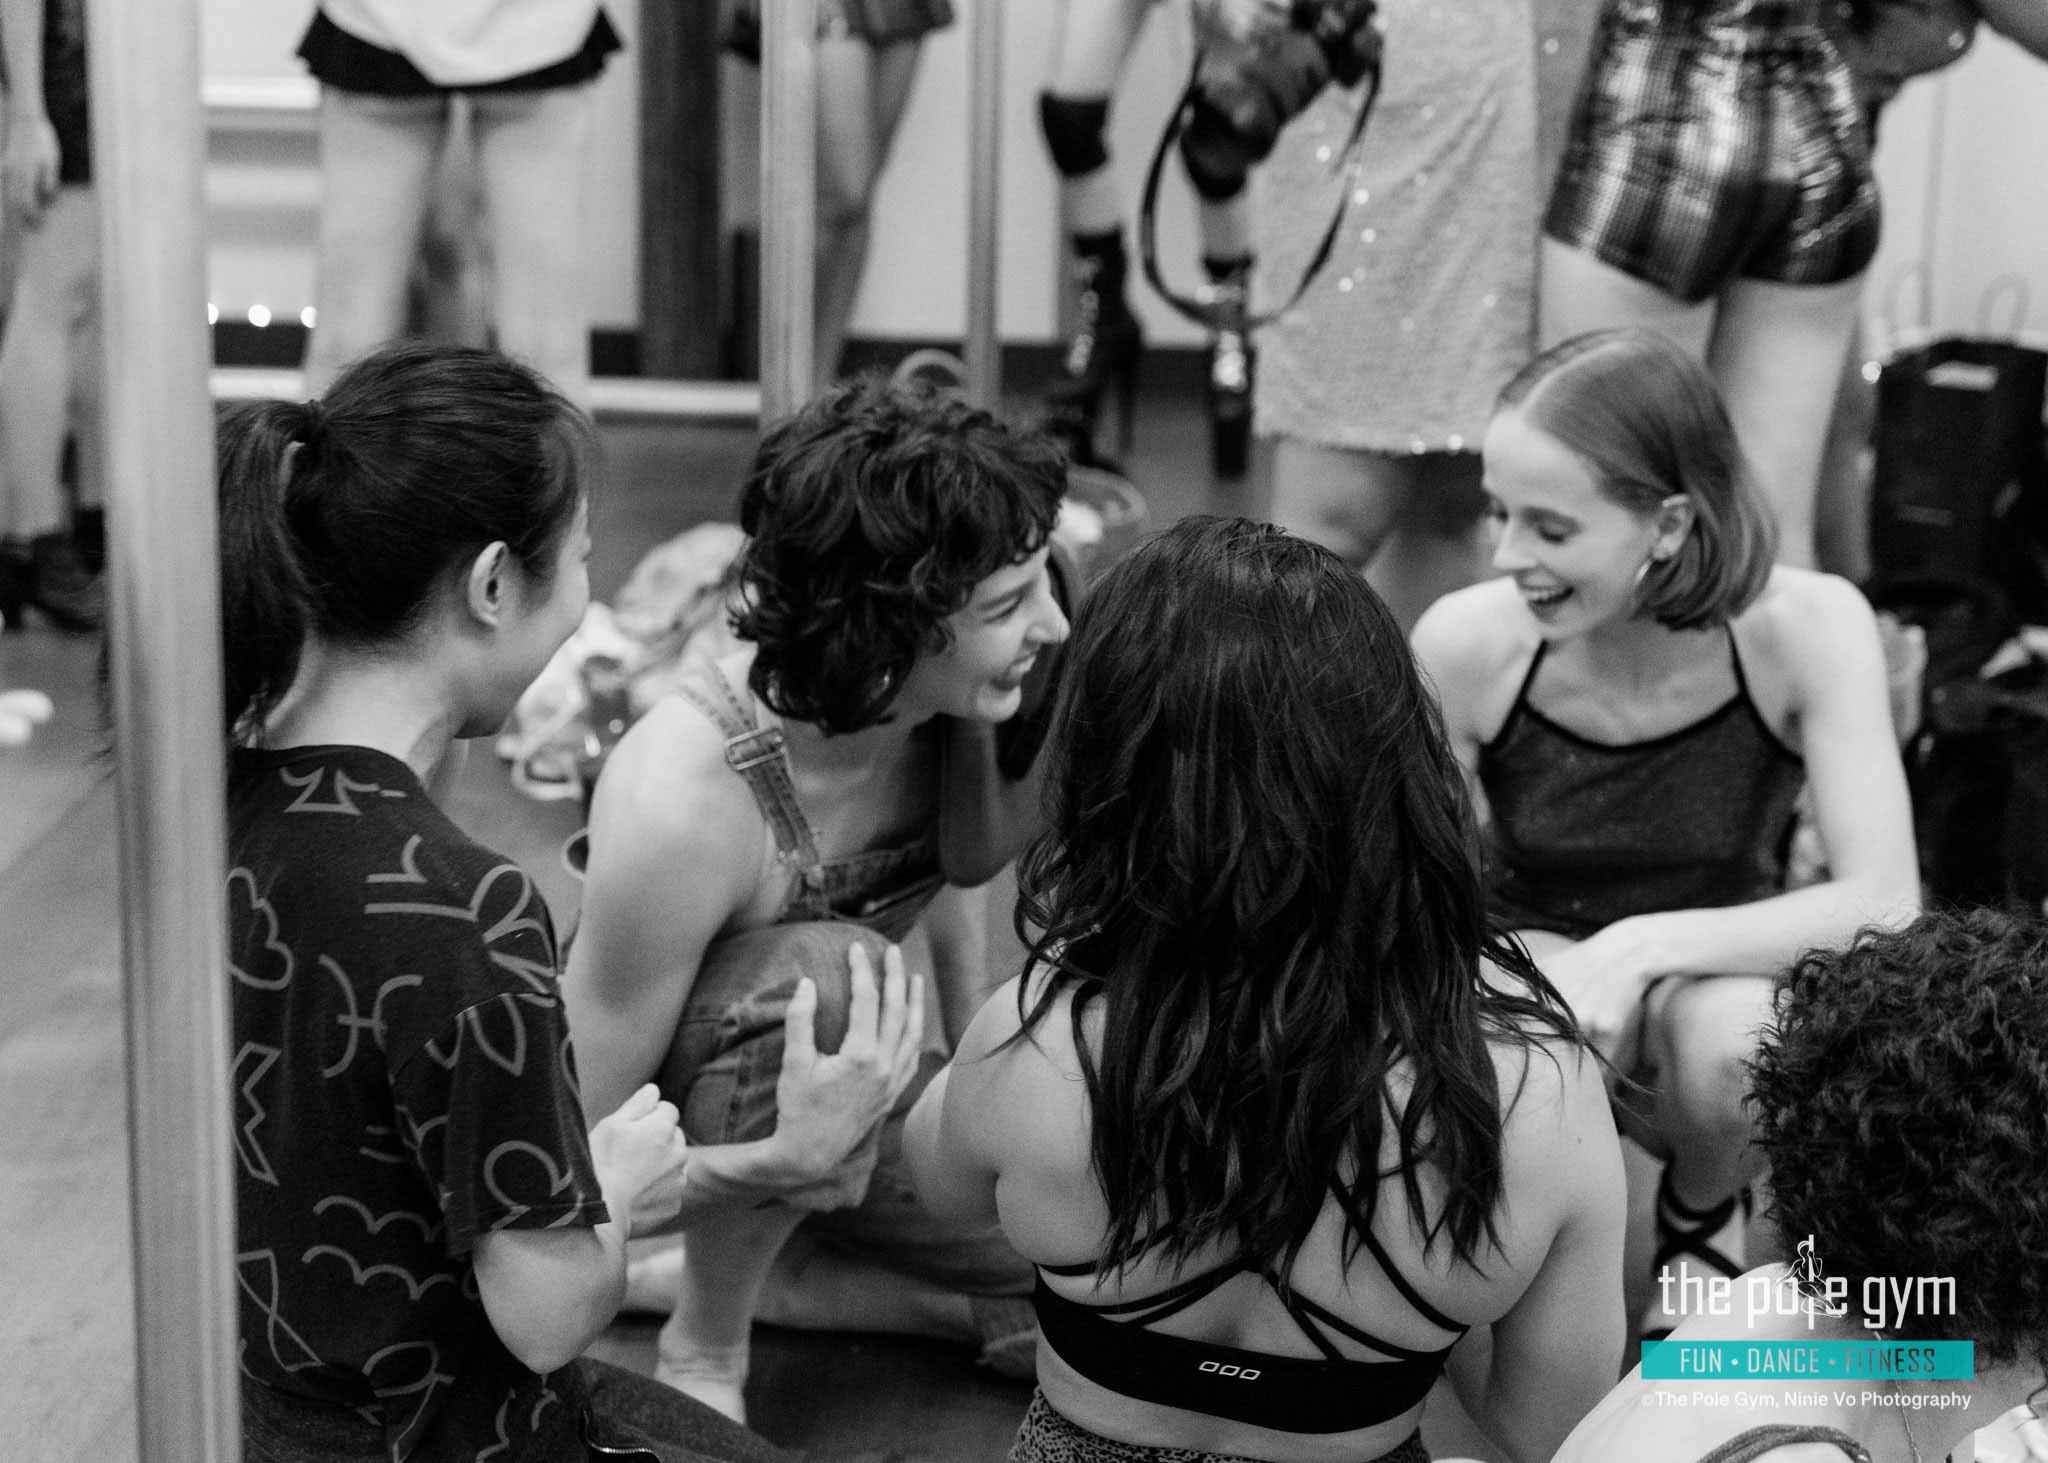 The Pole Gym Brisbane City community. Behind the scenes from the 70's Performance Night. Students laughing together.